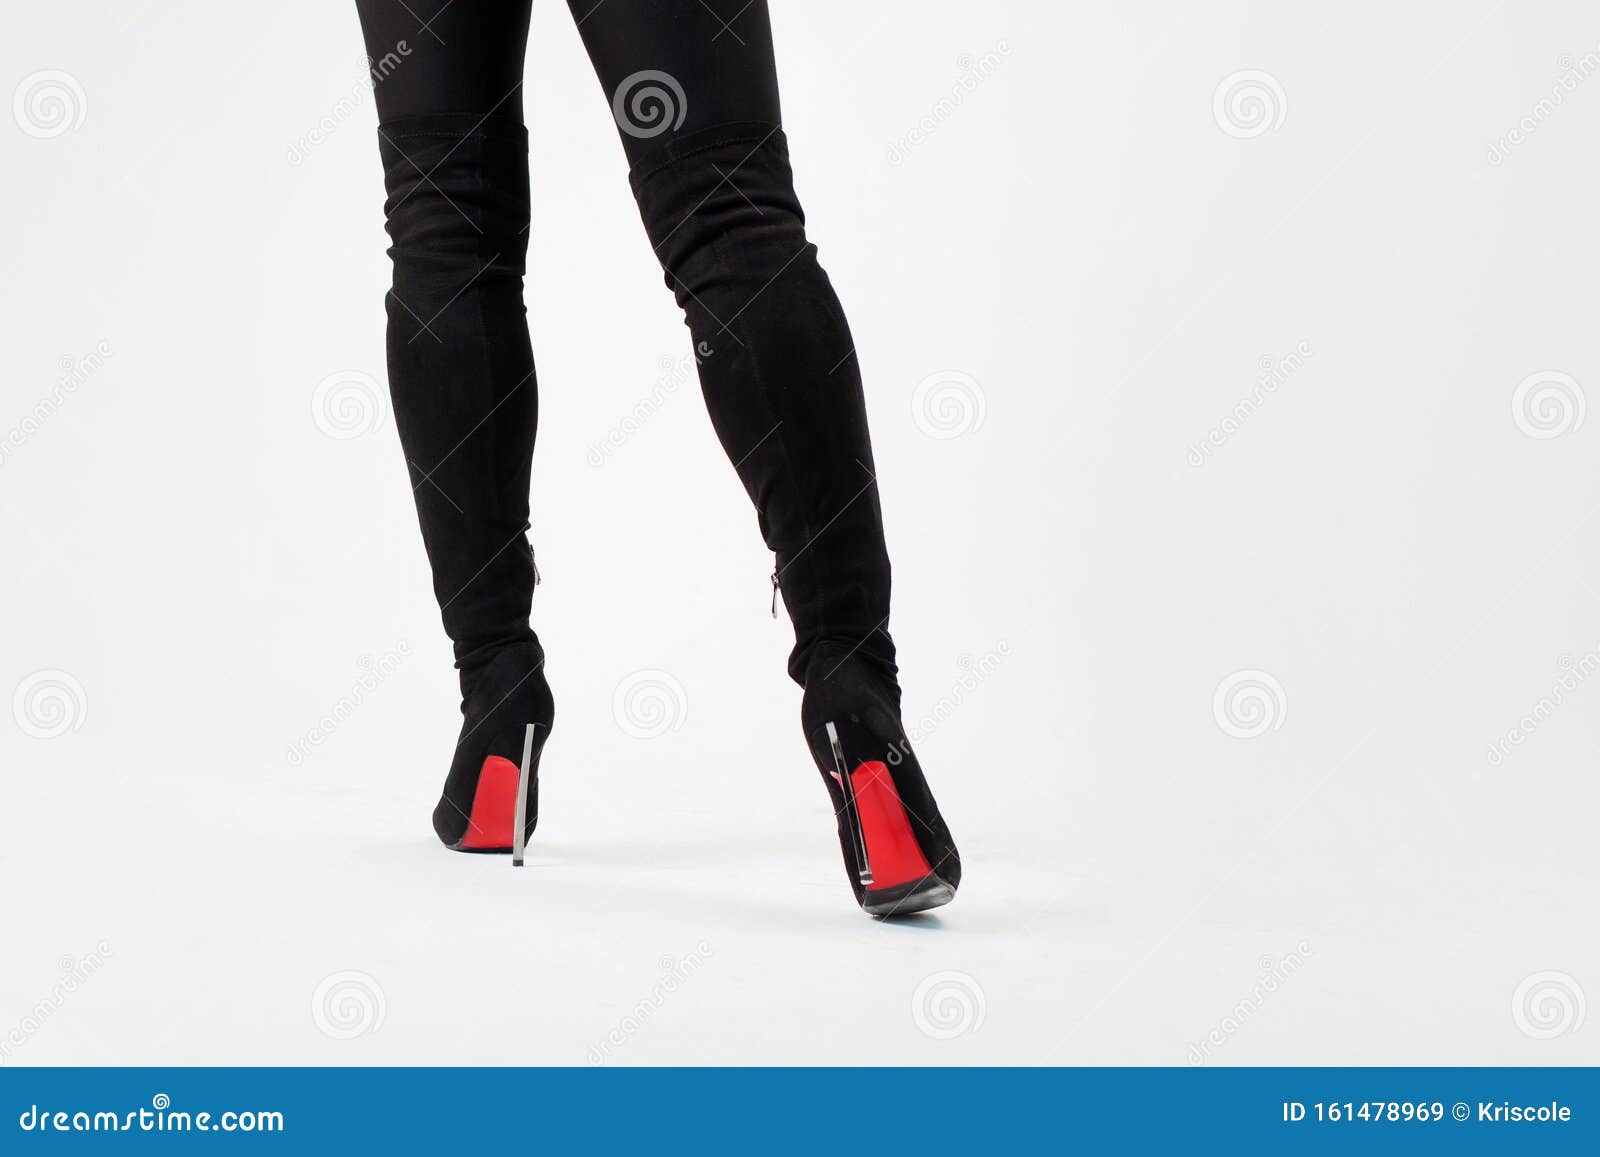 Slim Legs in Knee-high Black Boots. Style, Body Parts on Stock Image ...